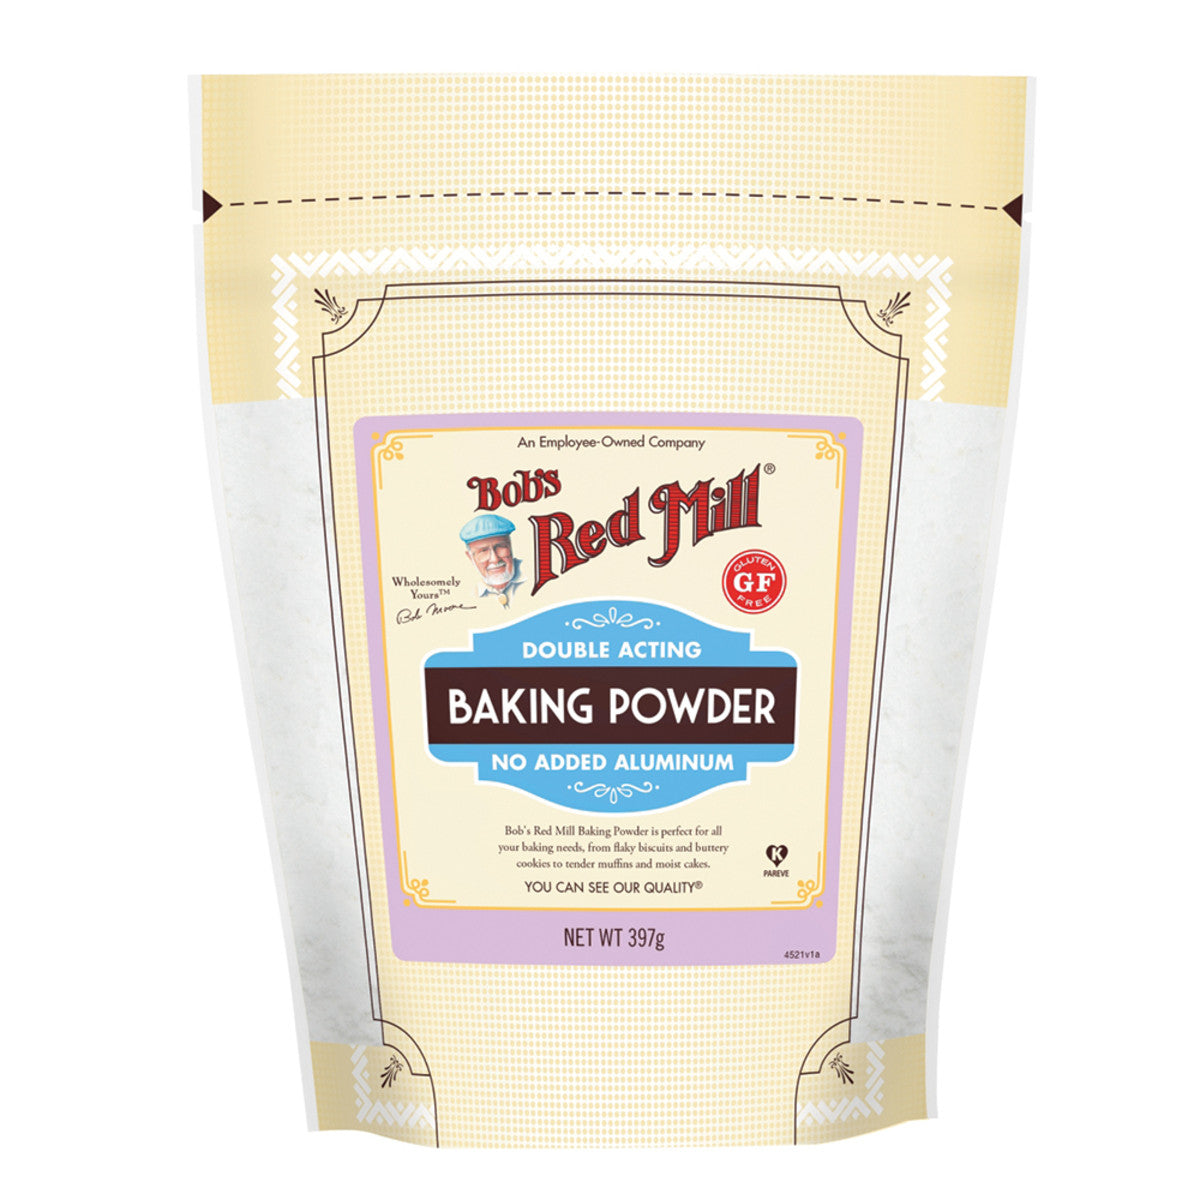 Bob's Red Mill - Double Acting Baking Powder (Al Free)